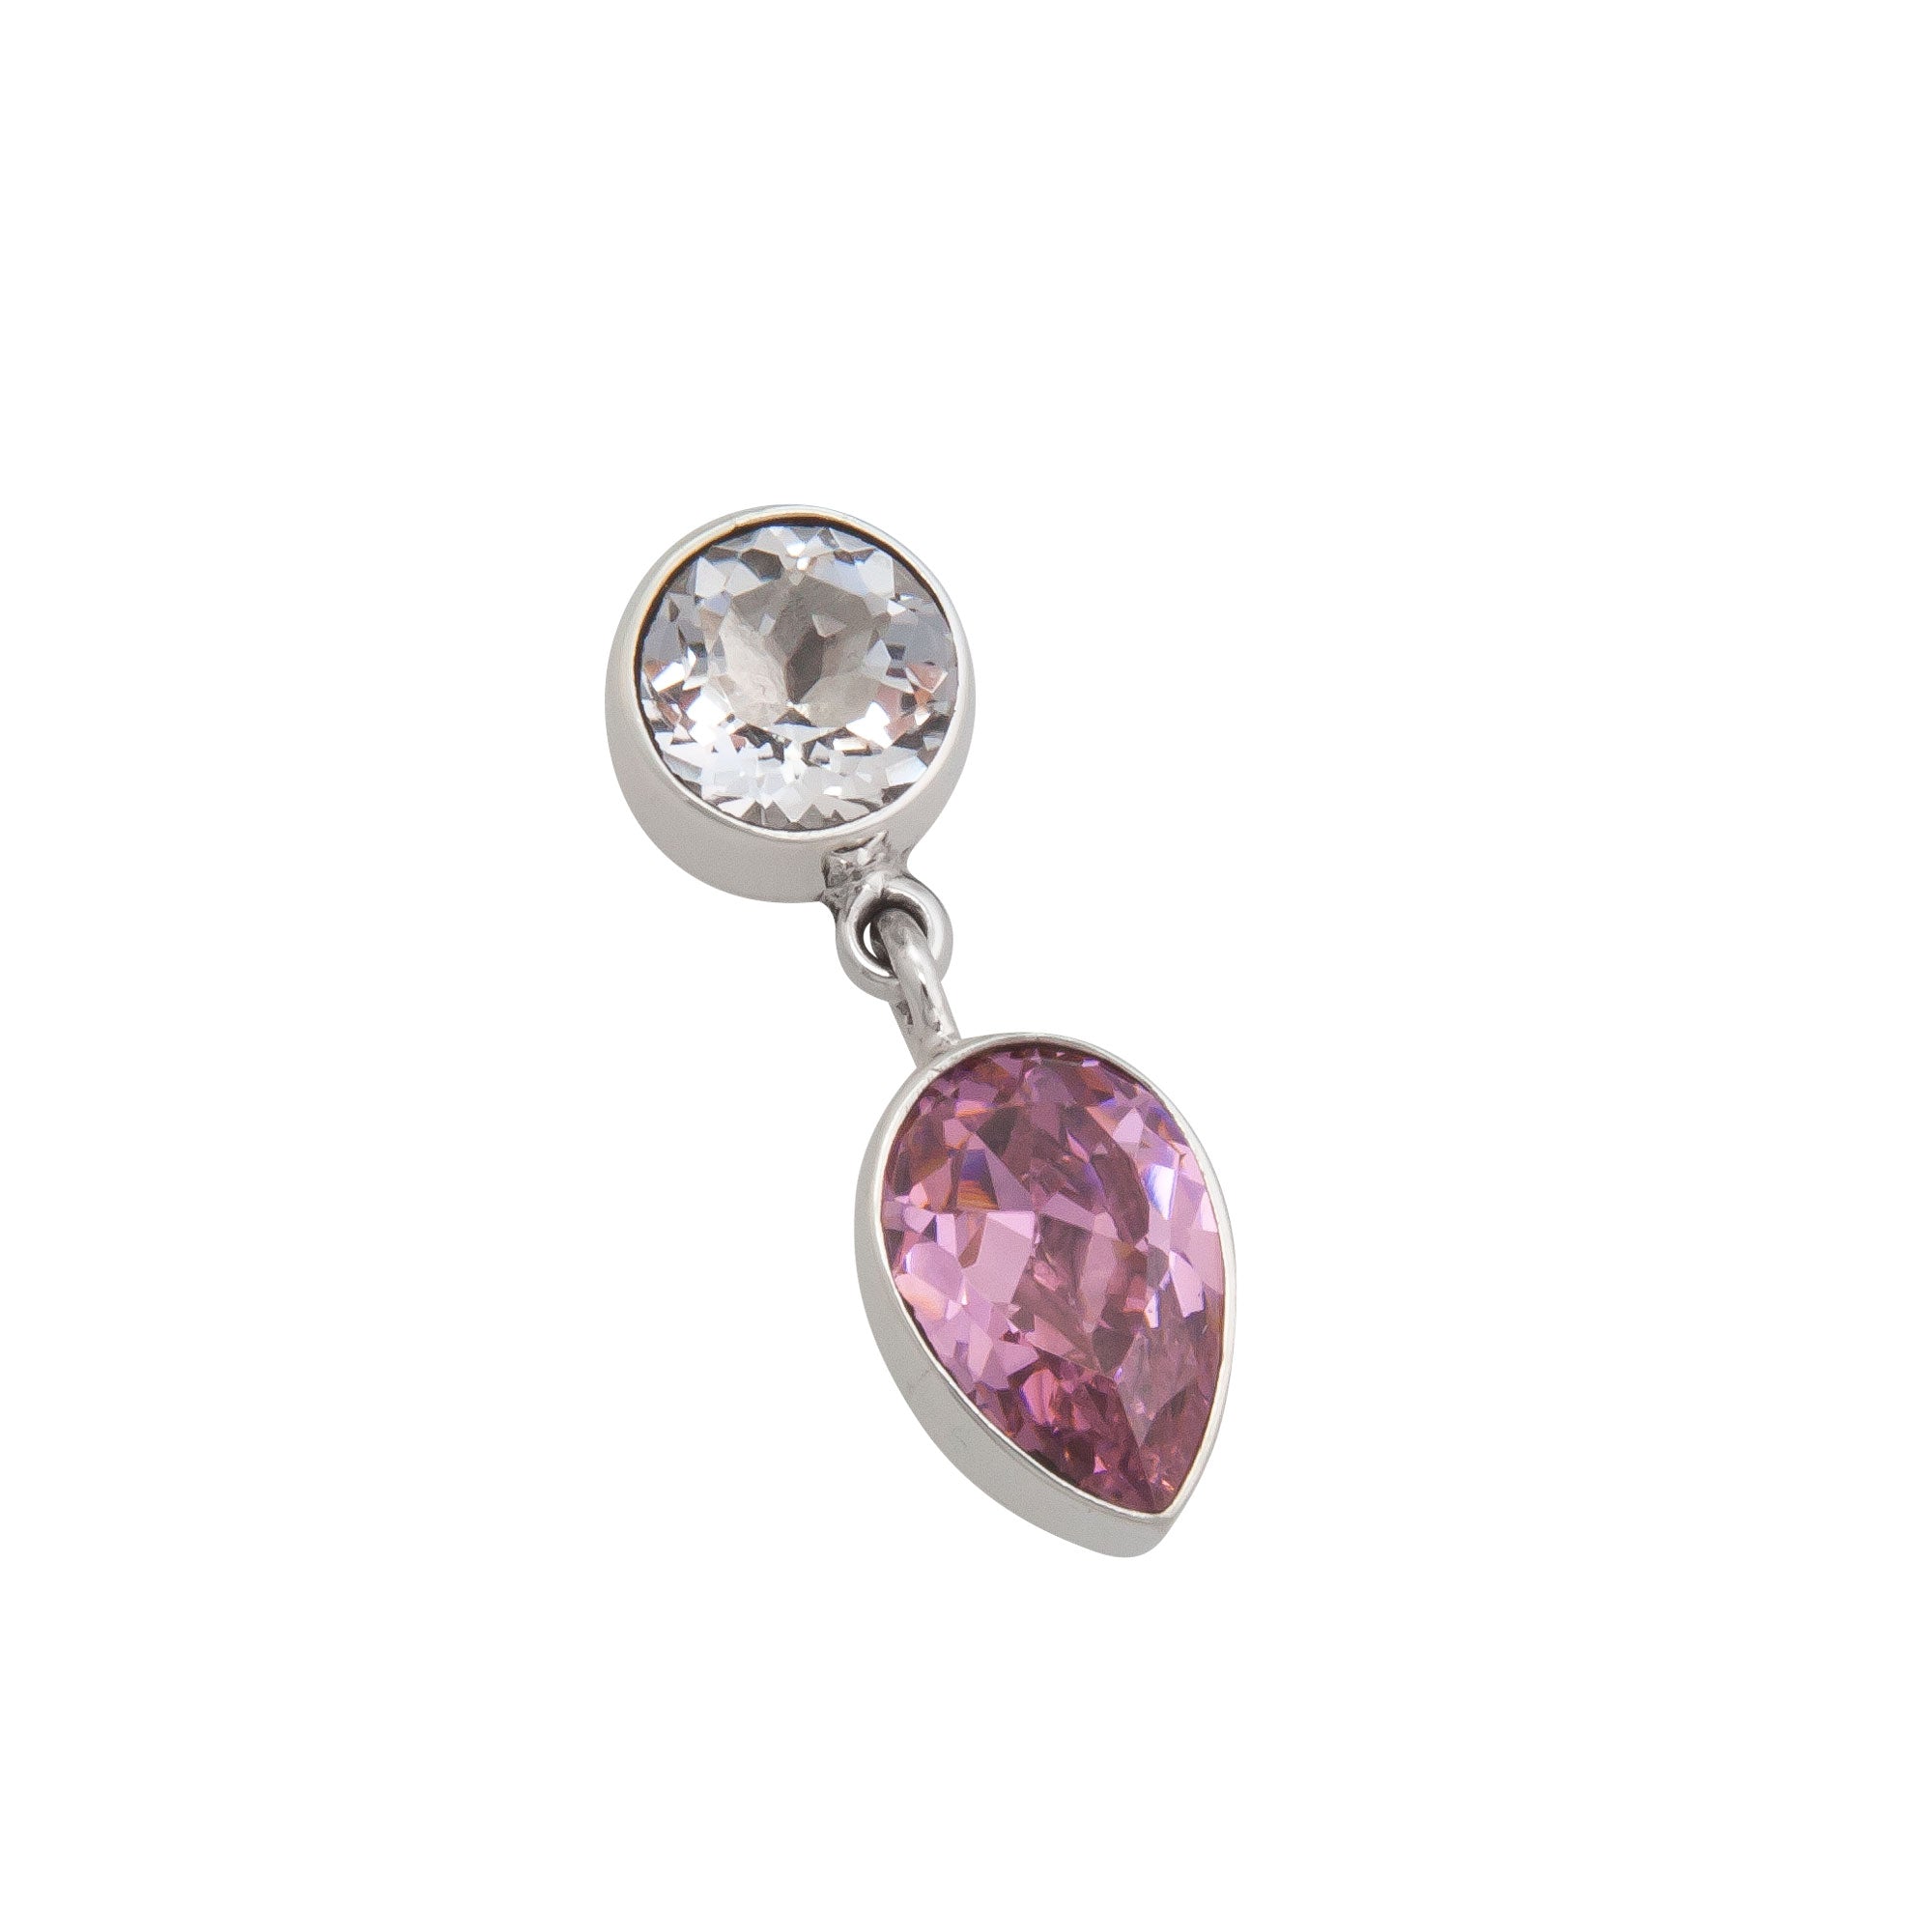 Charles Albert Jewelry - Adore Sterling Silver Quartz and Pink CZ Post Earrings